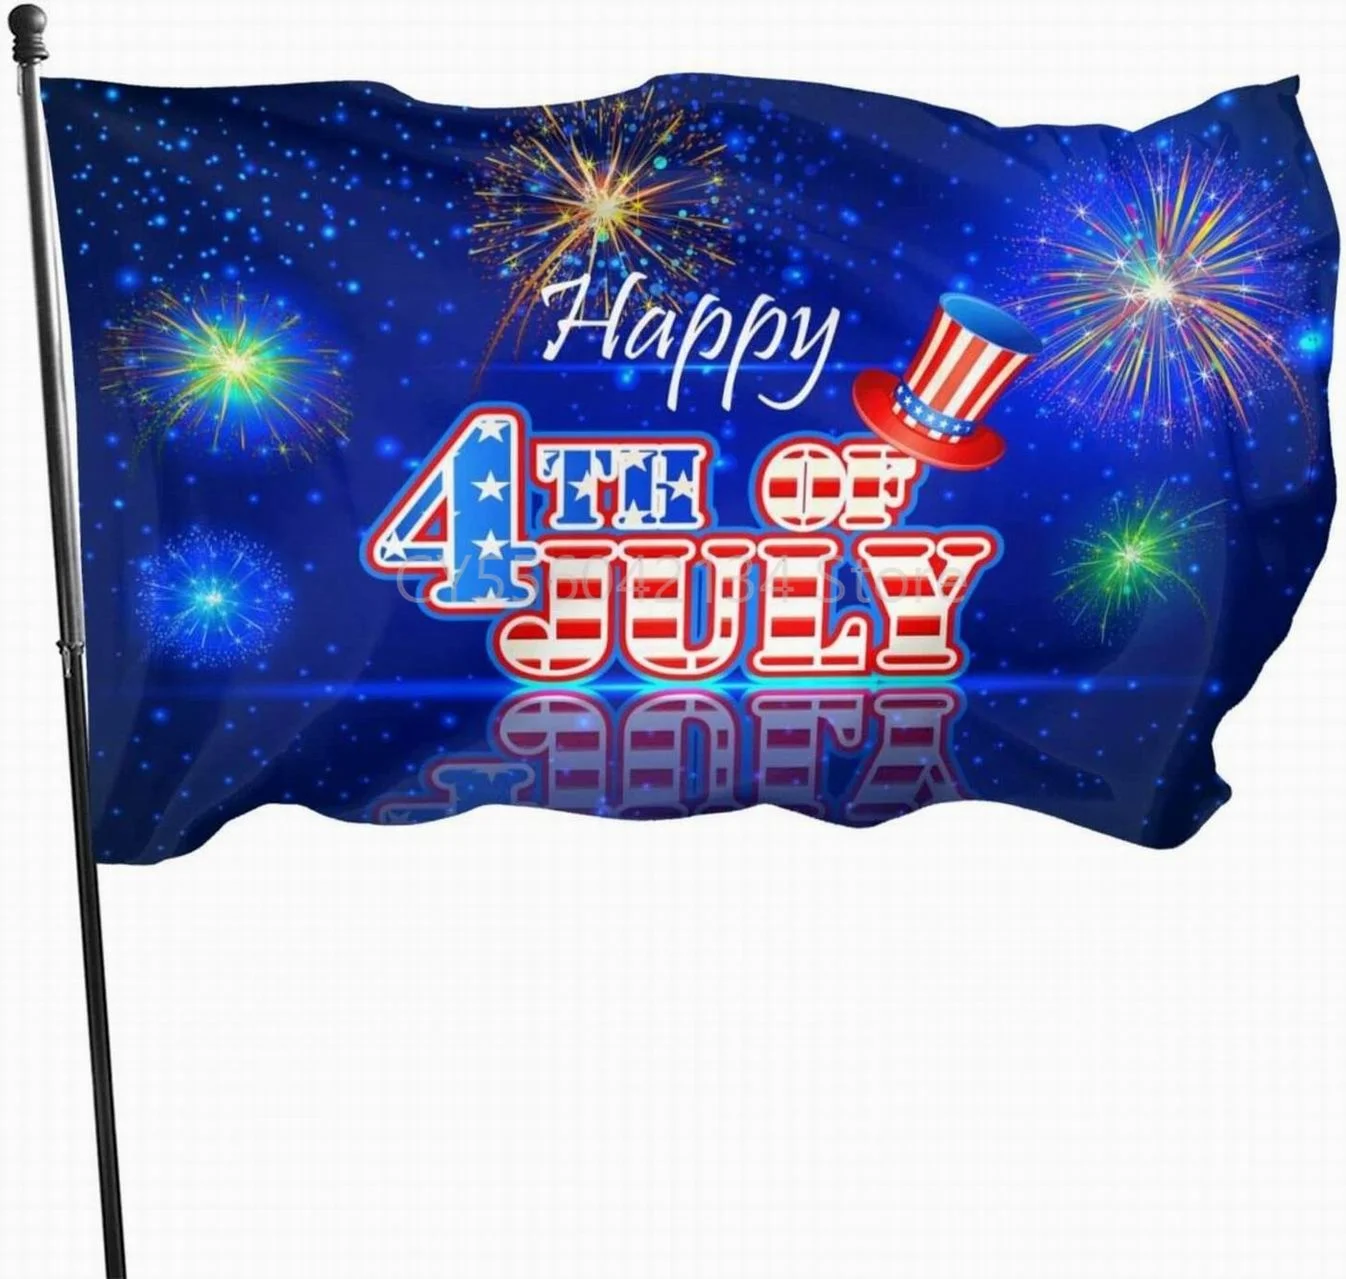 

Independence Day 4th of July Patriotic Flag Outdoor Decorative Banner Outside Hanging Standard Flag for Yard Garden Lawn Holiday